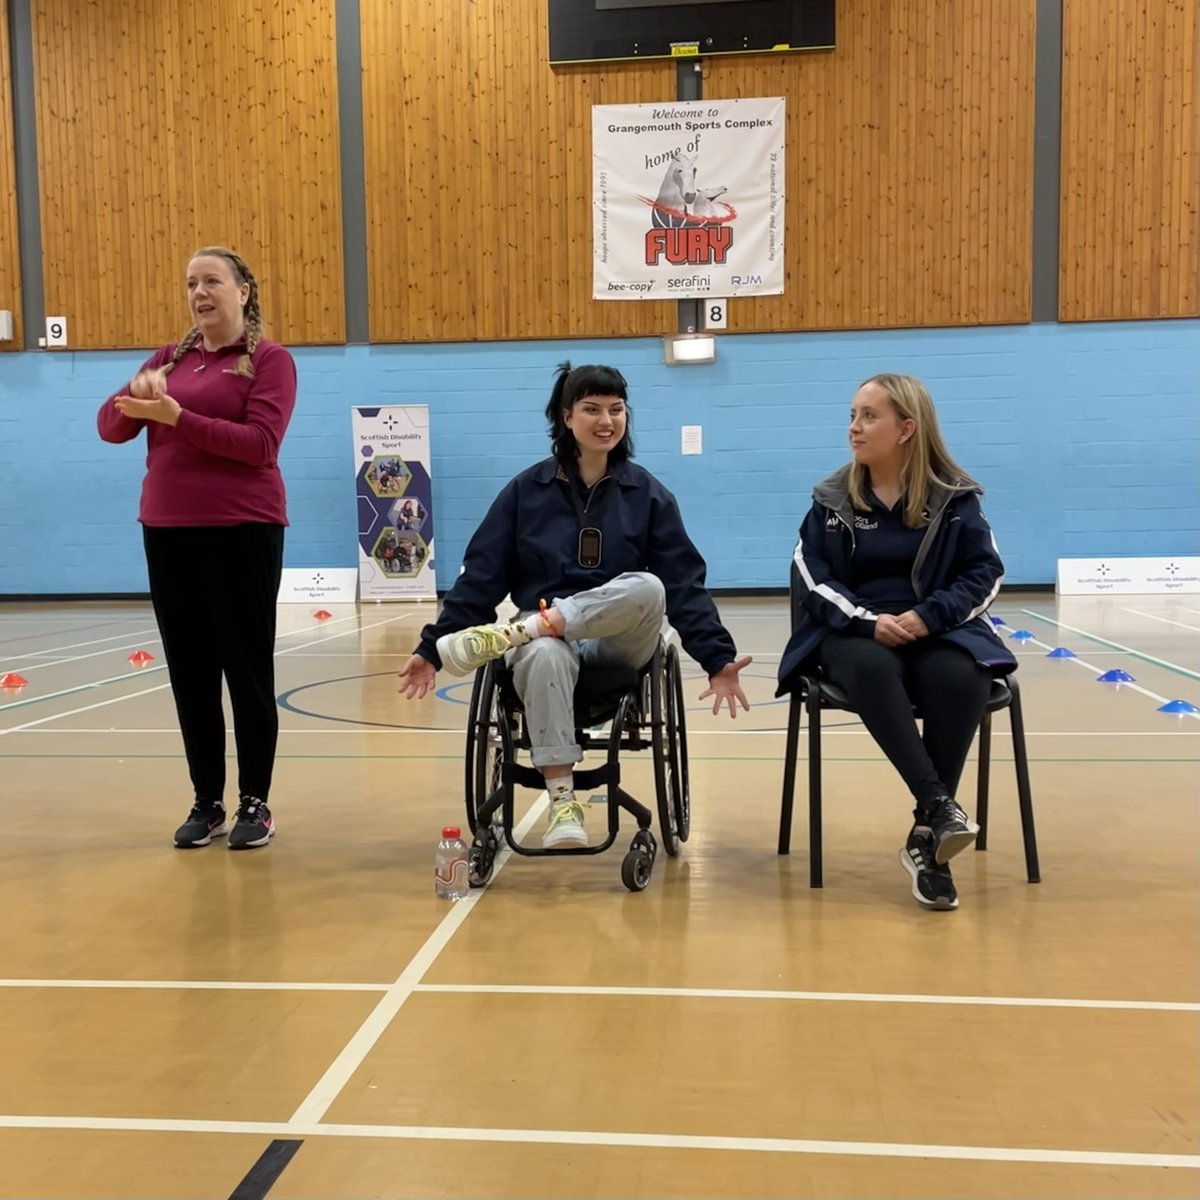 The Central Parasport Festival is underway at Grangemouth Sports Complex!! We’re starting the day off with a message from YPSP member @GraceEStirling  and former FVDS GOGA officer (and @cbbc’s newest Blue Peter presenter) Abby Cook!

#BeActiveBeWell